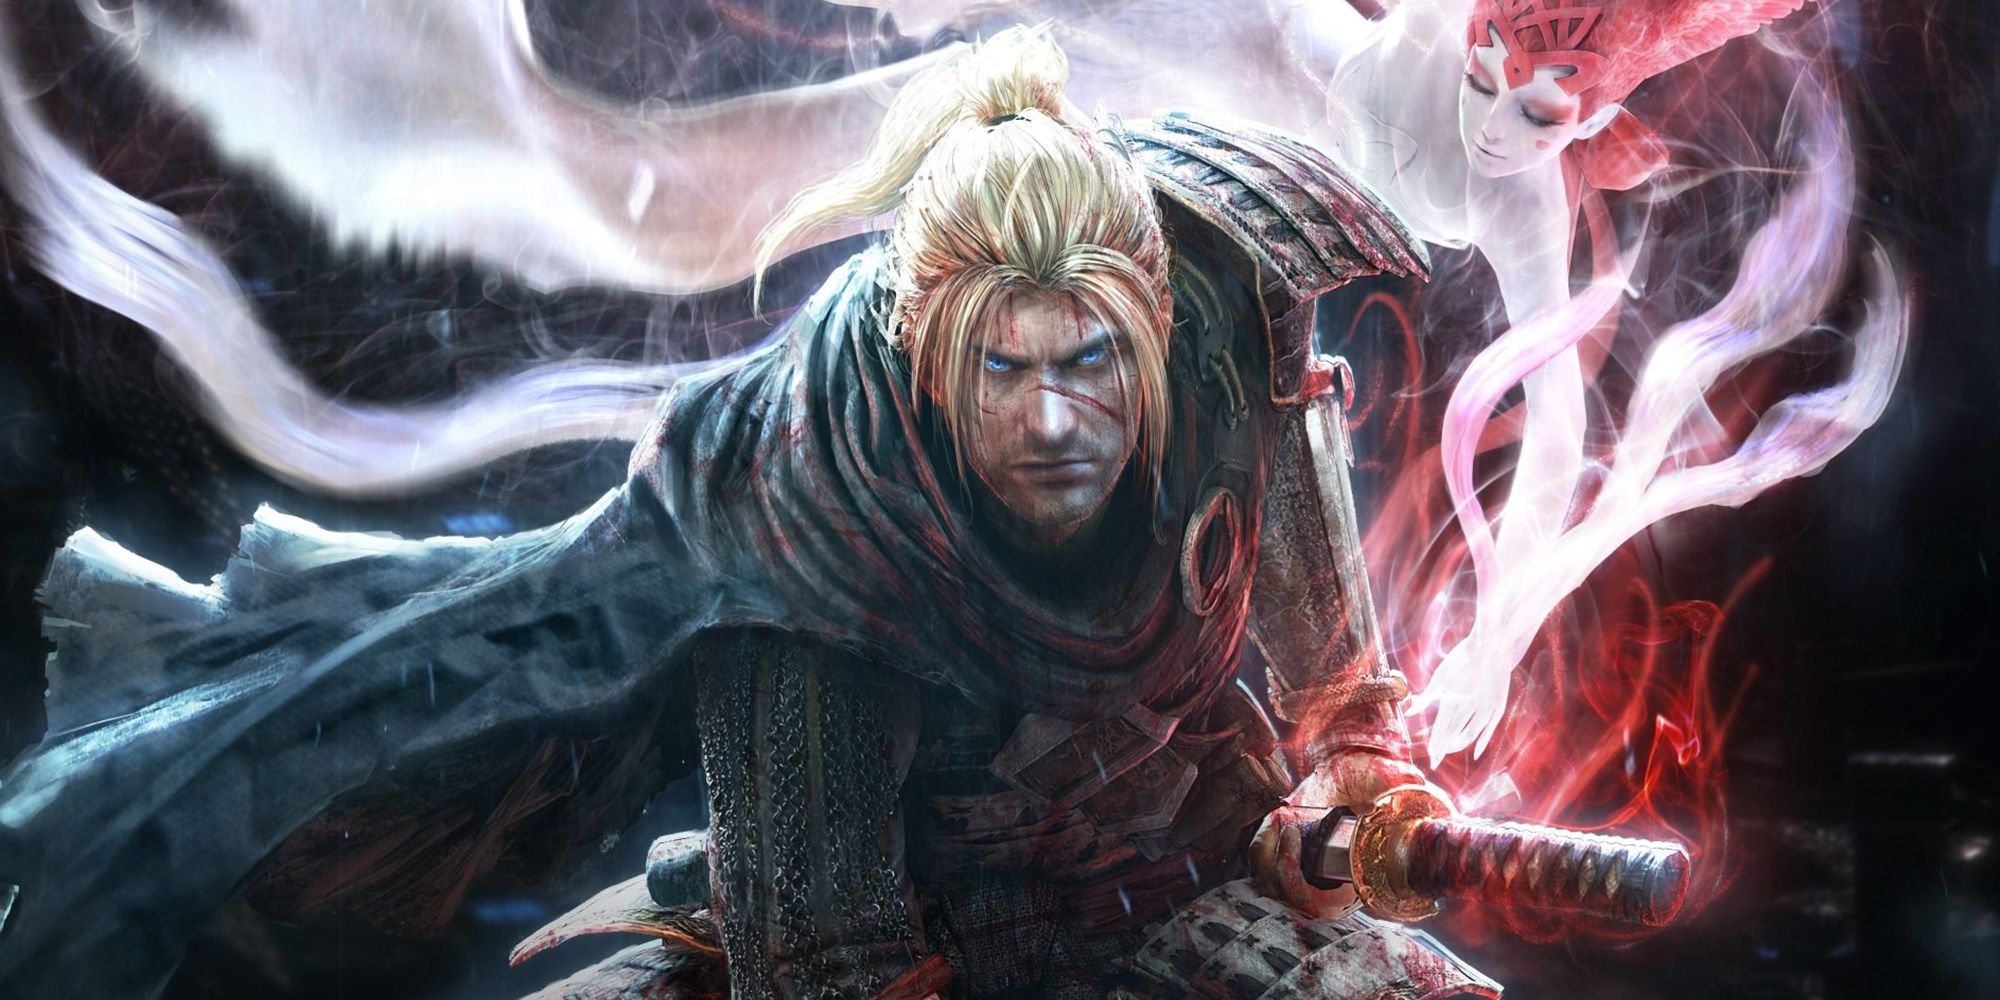 Nioh - Cover Art Showing Main Character William